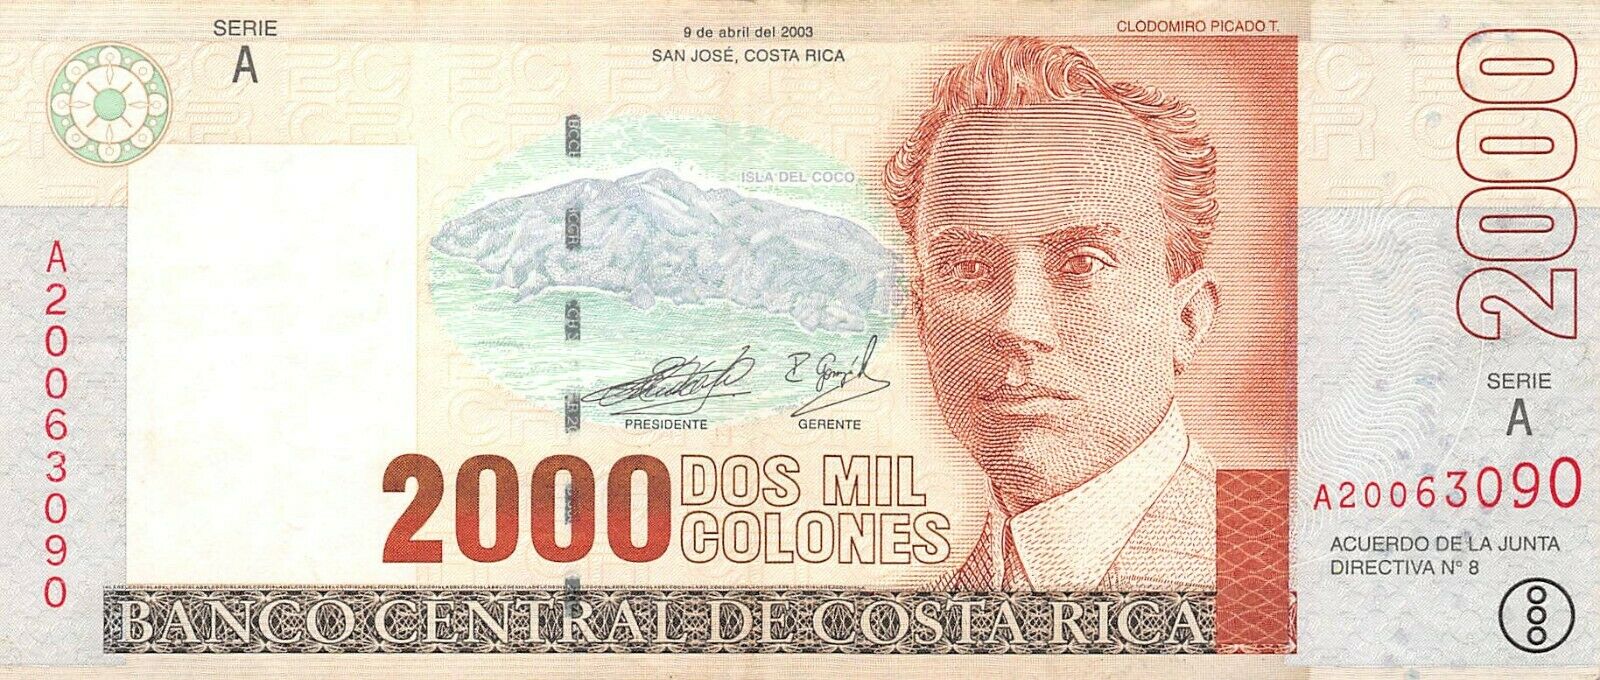 Costa Rica  2,000  Colones  9.4.2003  Series  A  Circulated Banknote G10